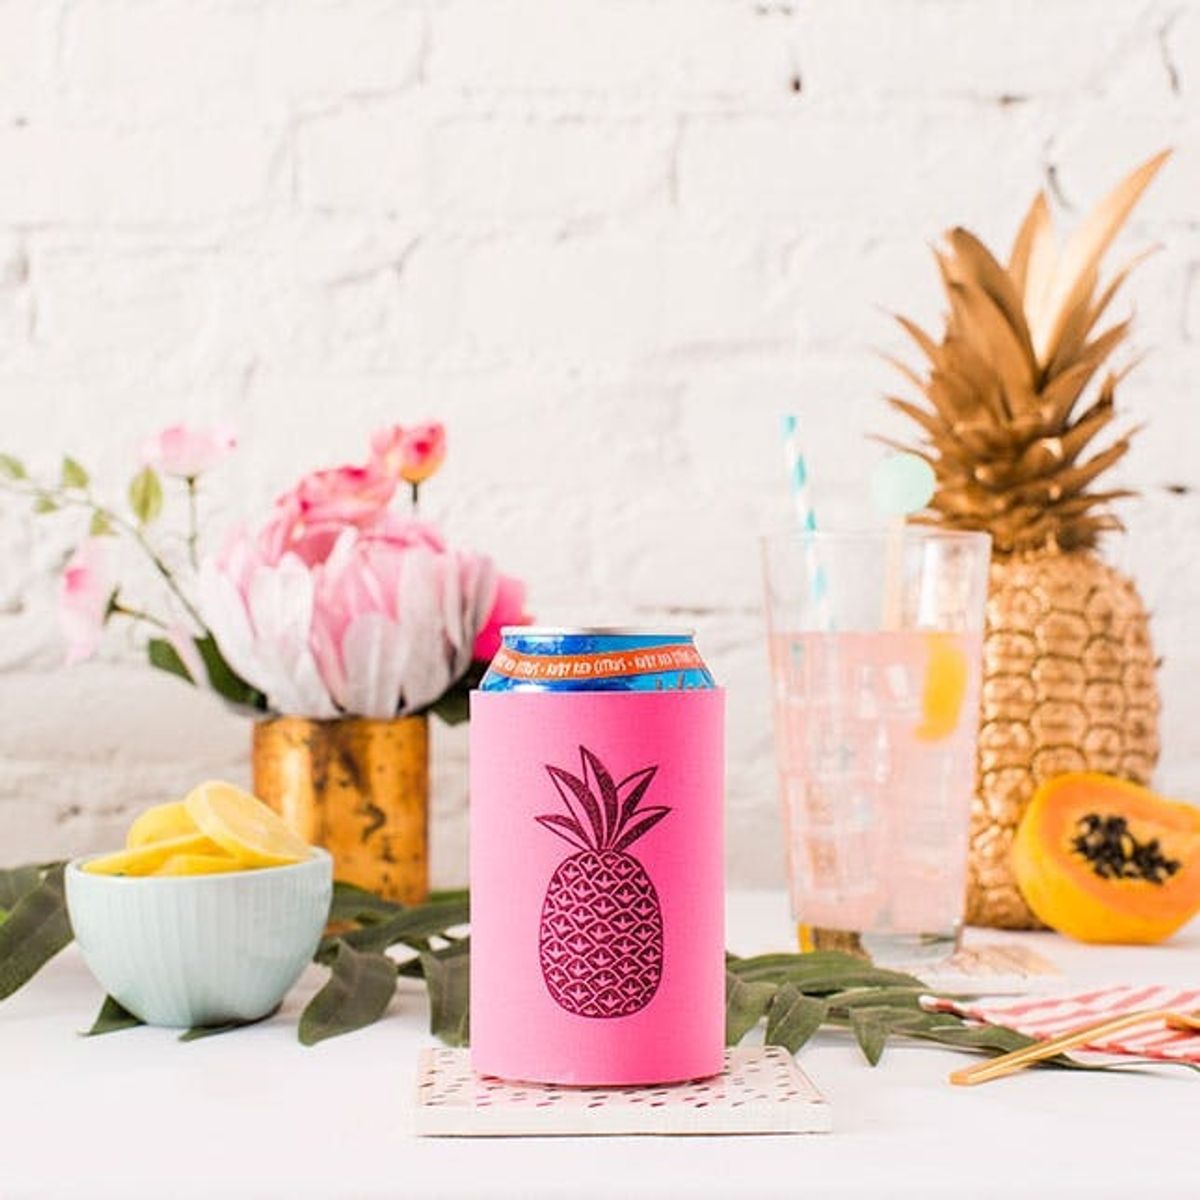 Warm Up Your New Home With a Tropical Soirée